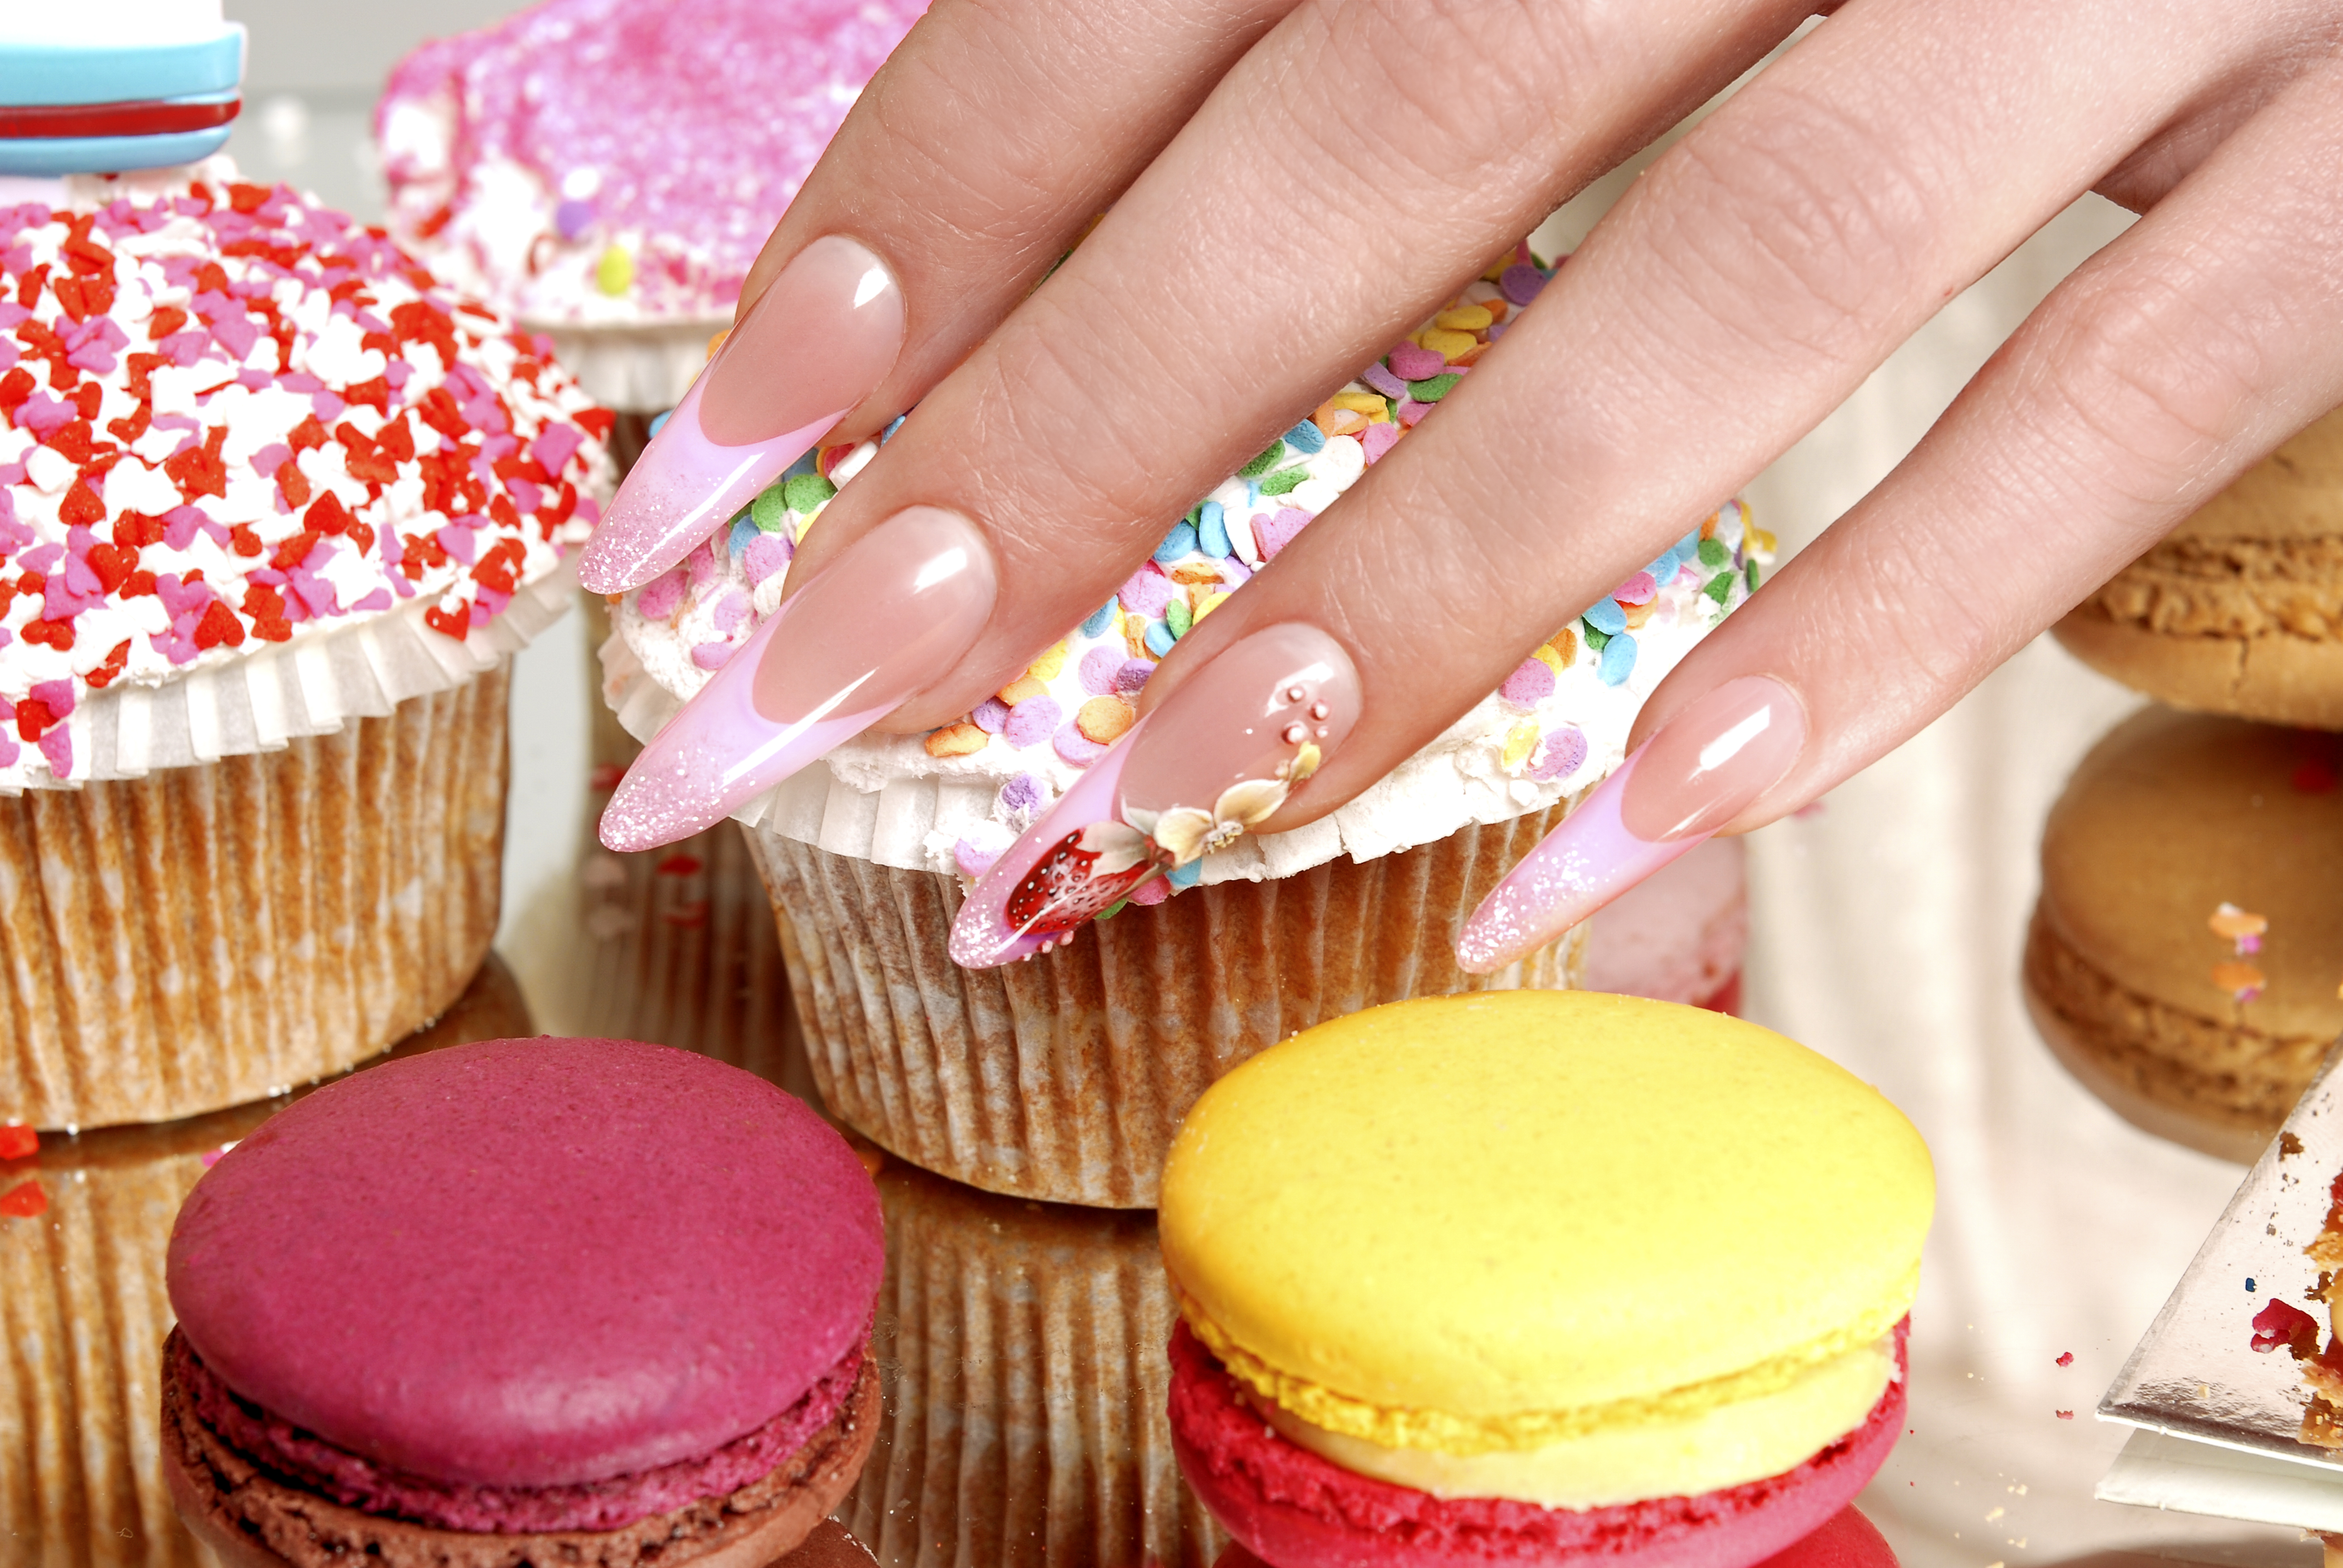 Free nail art Photos & Pictures | FreeImages